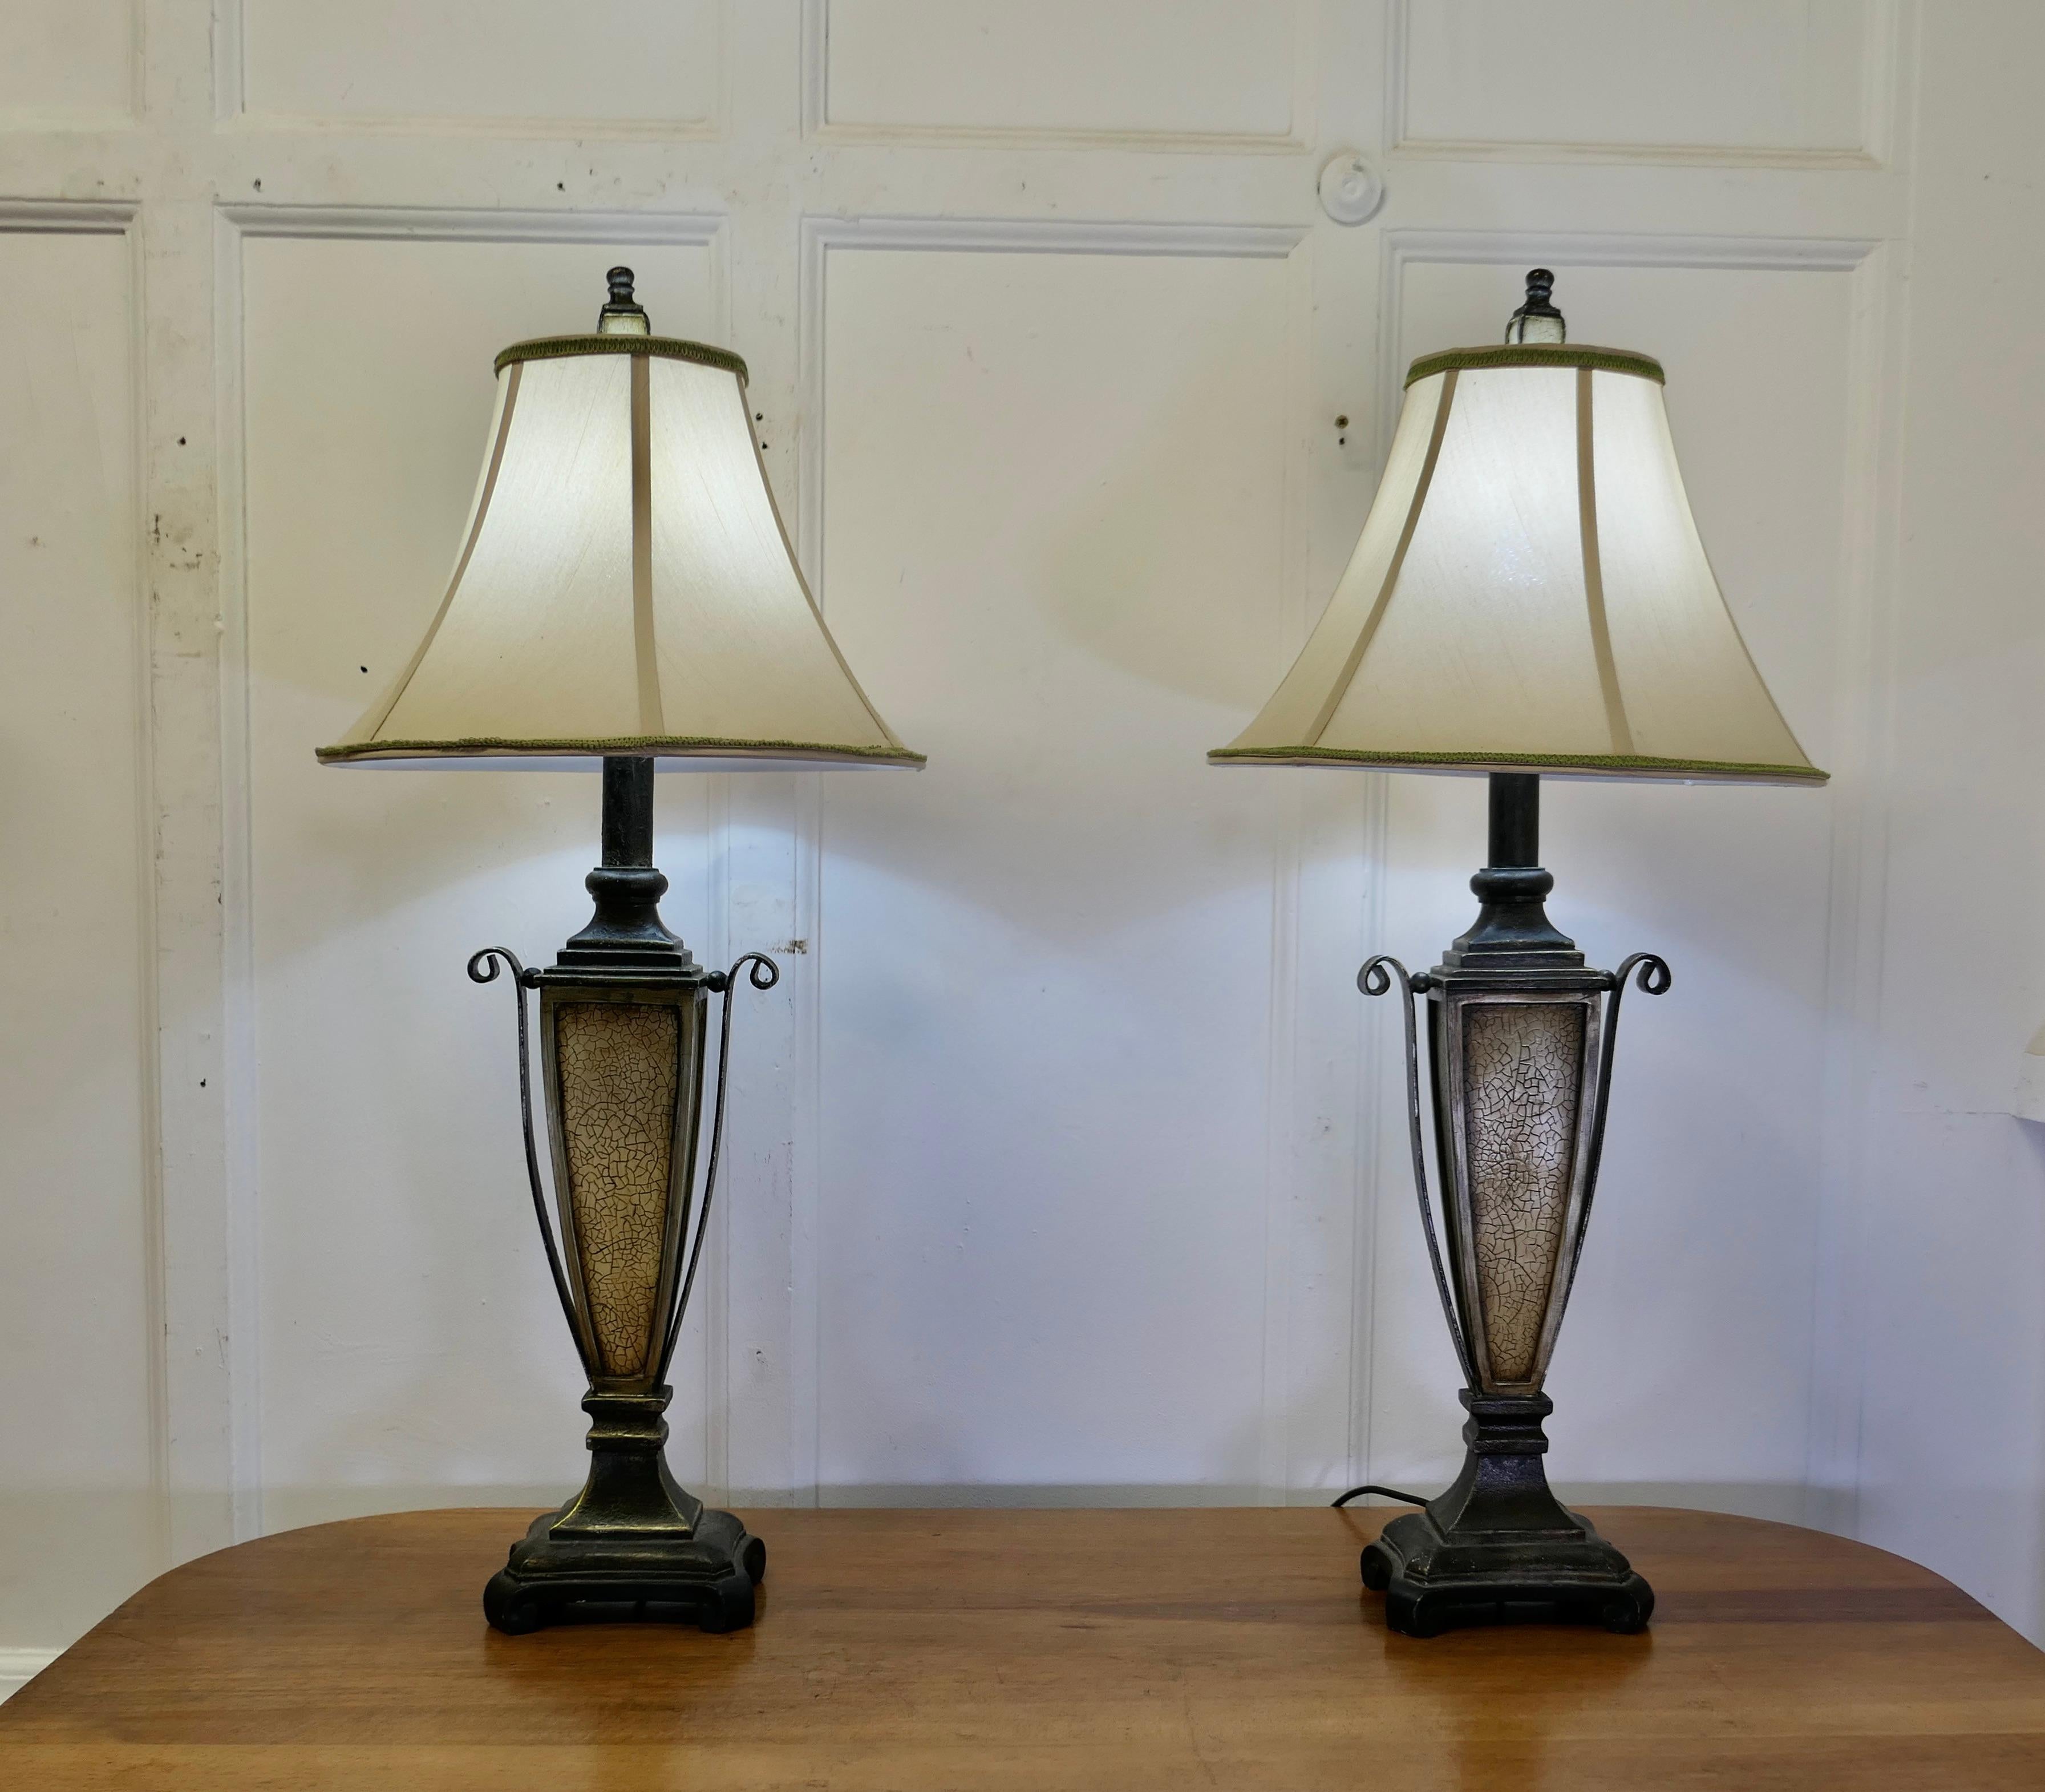 Pair of Decorative Art Deco Style Table Lamps   An exciting pair of lamp In Good Condition For Sale In Chillerton, Isle of Wight